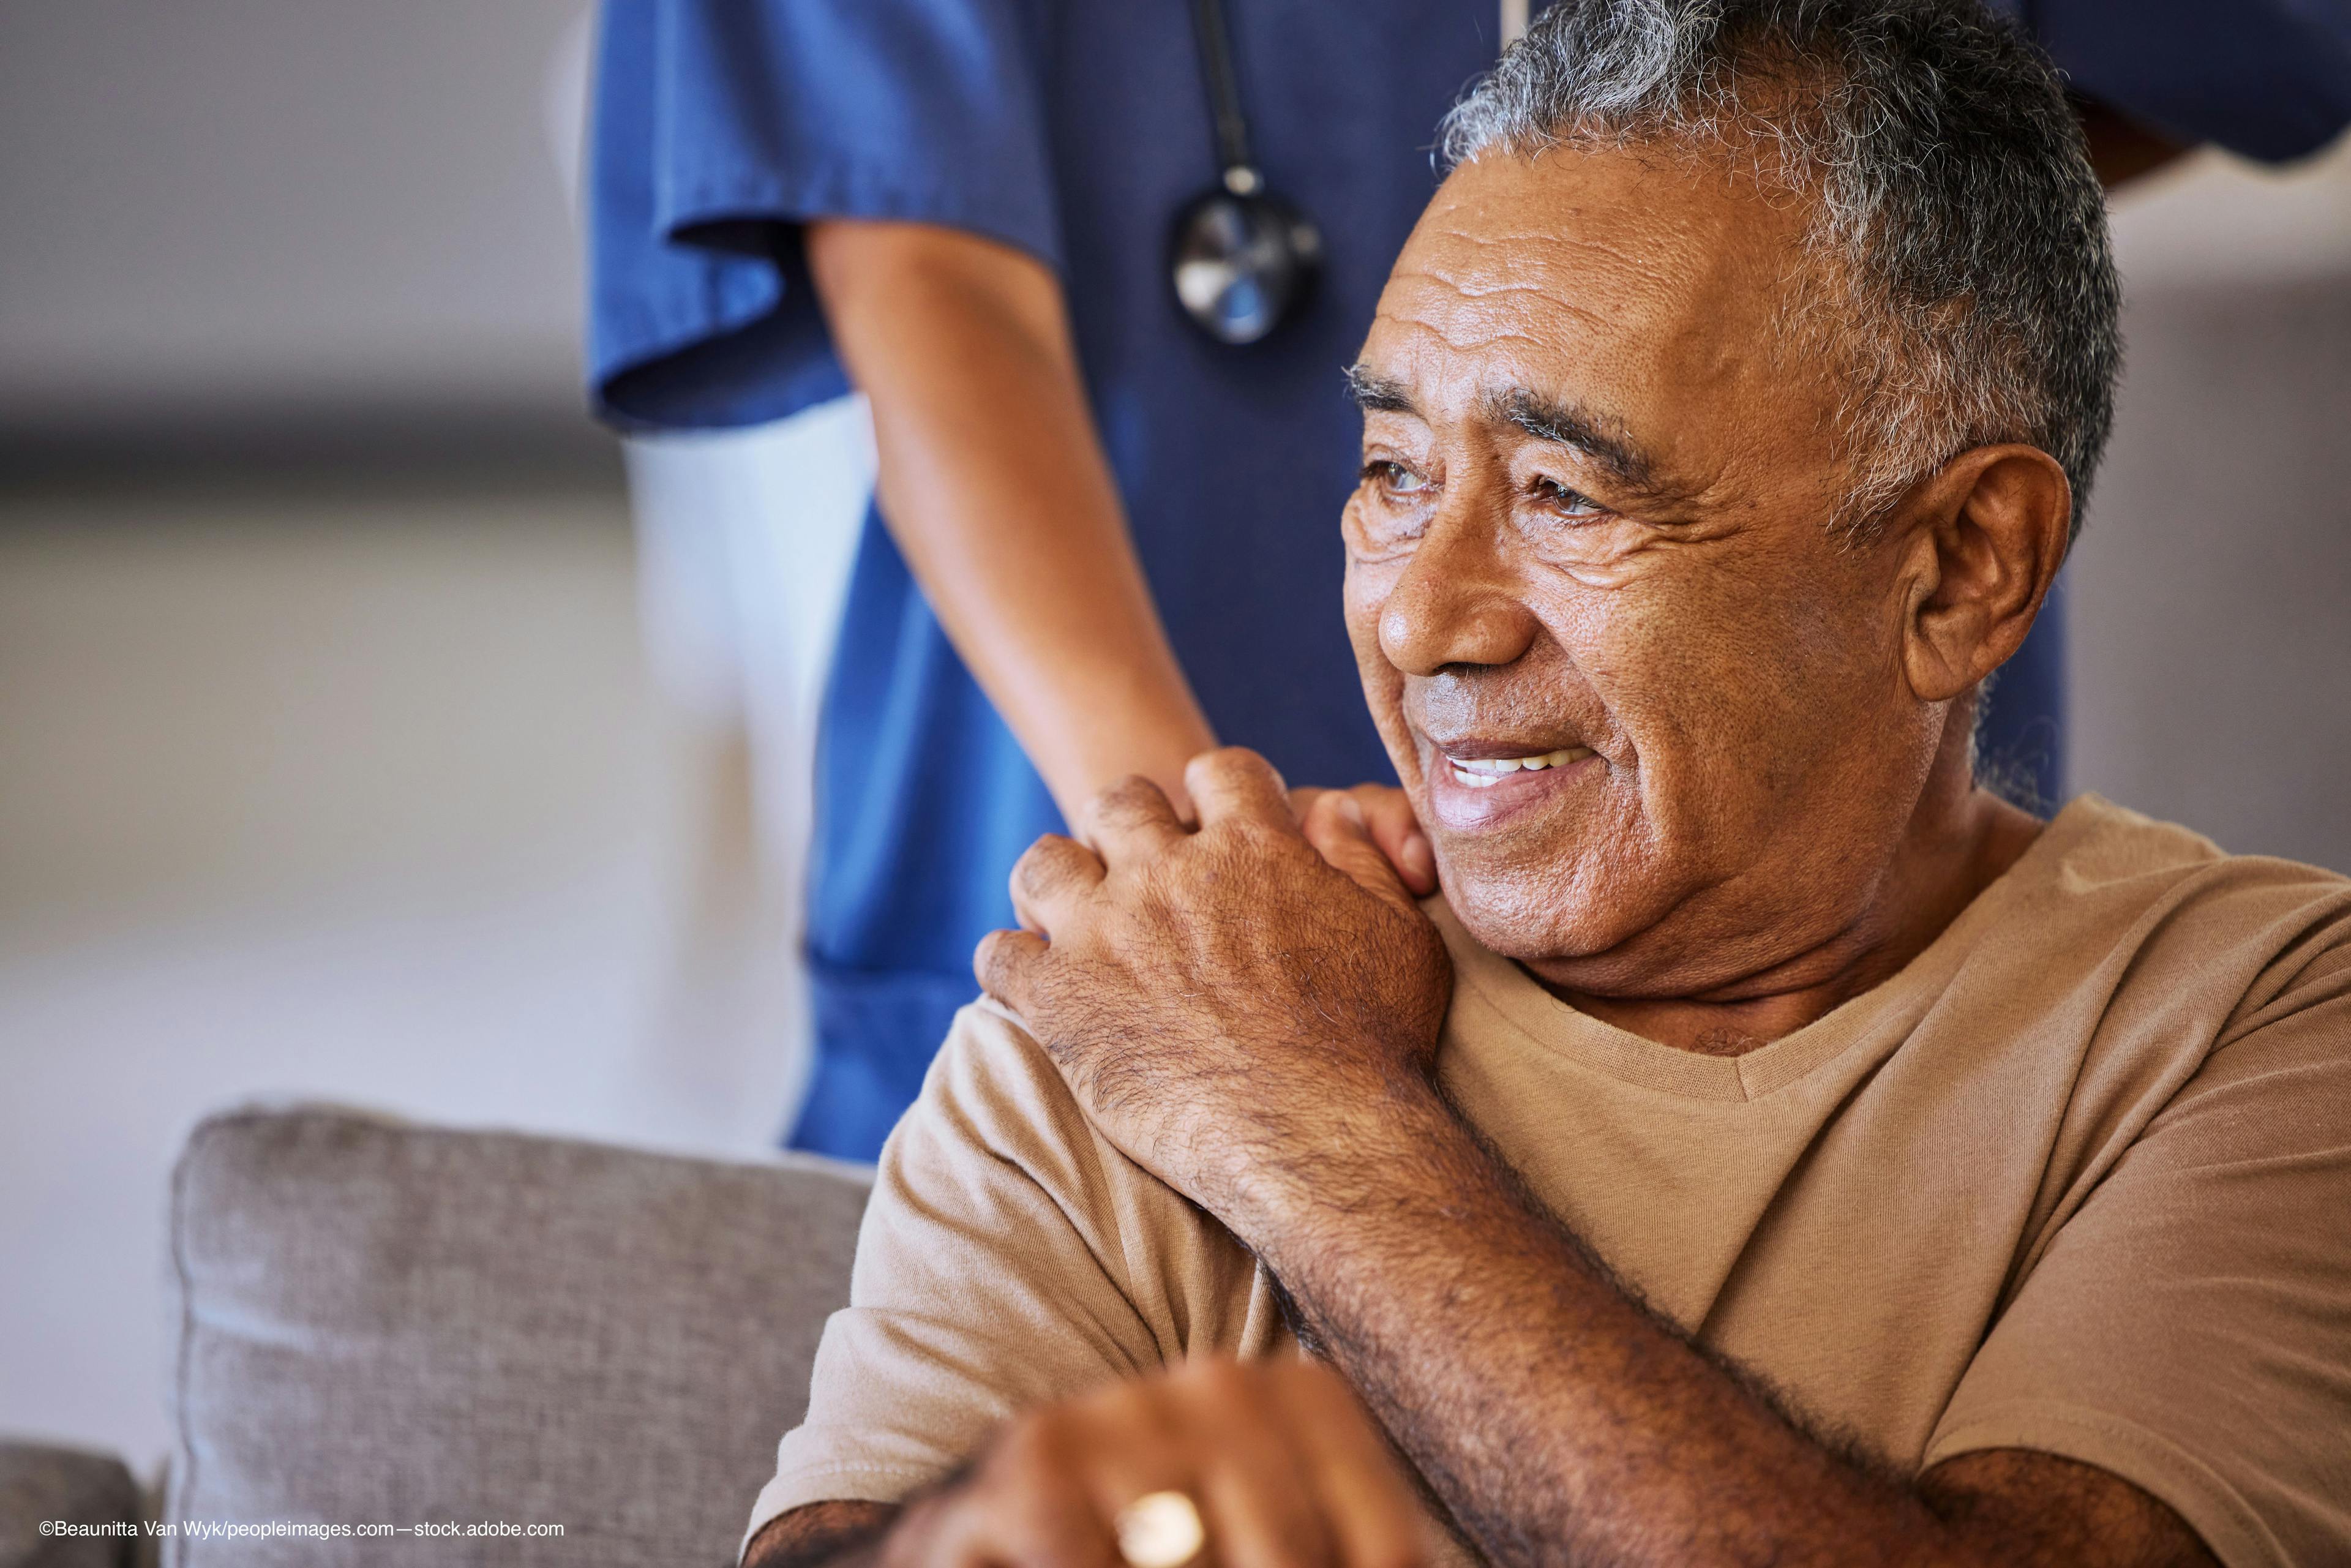 Older man sitting down and placing his hand on the physician's hand on his shoulder Image Credit: ©Beaunitta Van Wyk/peopleimages.com - stock.adobe.com